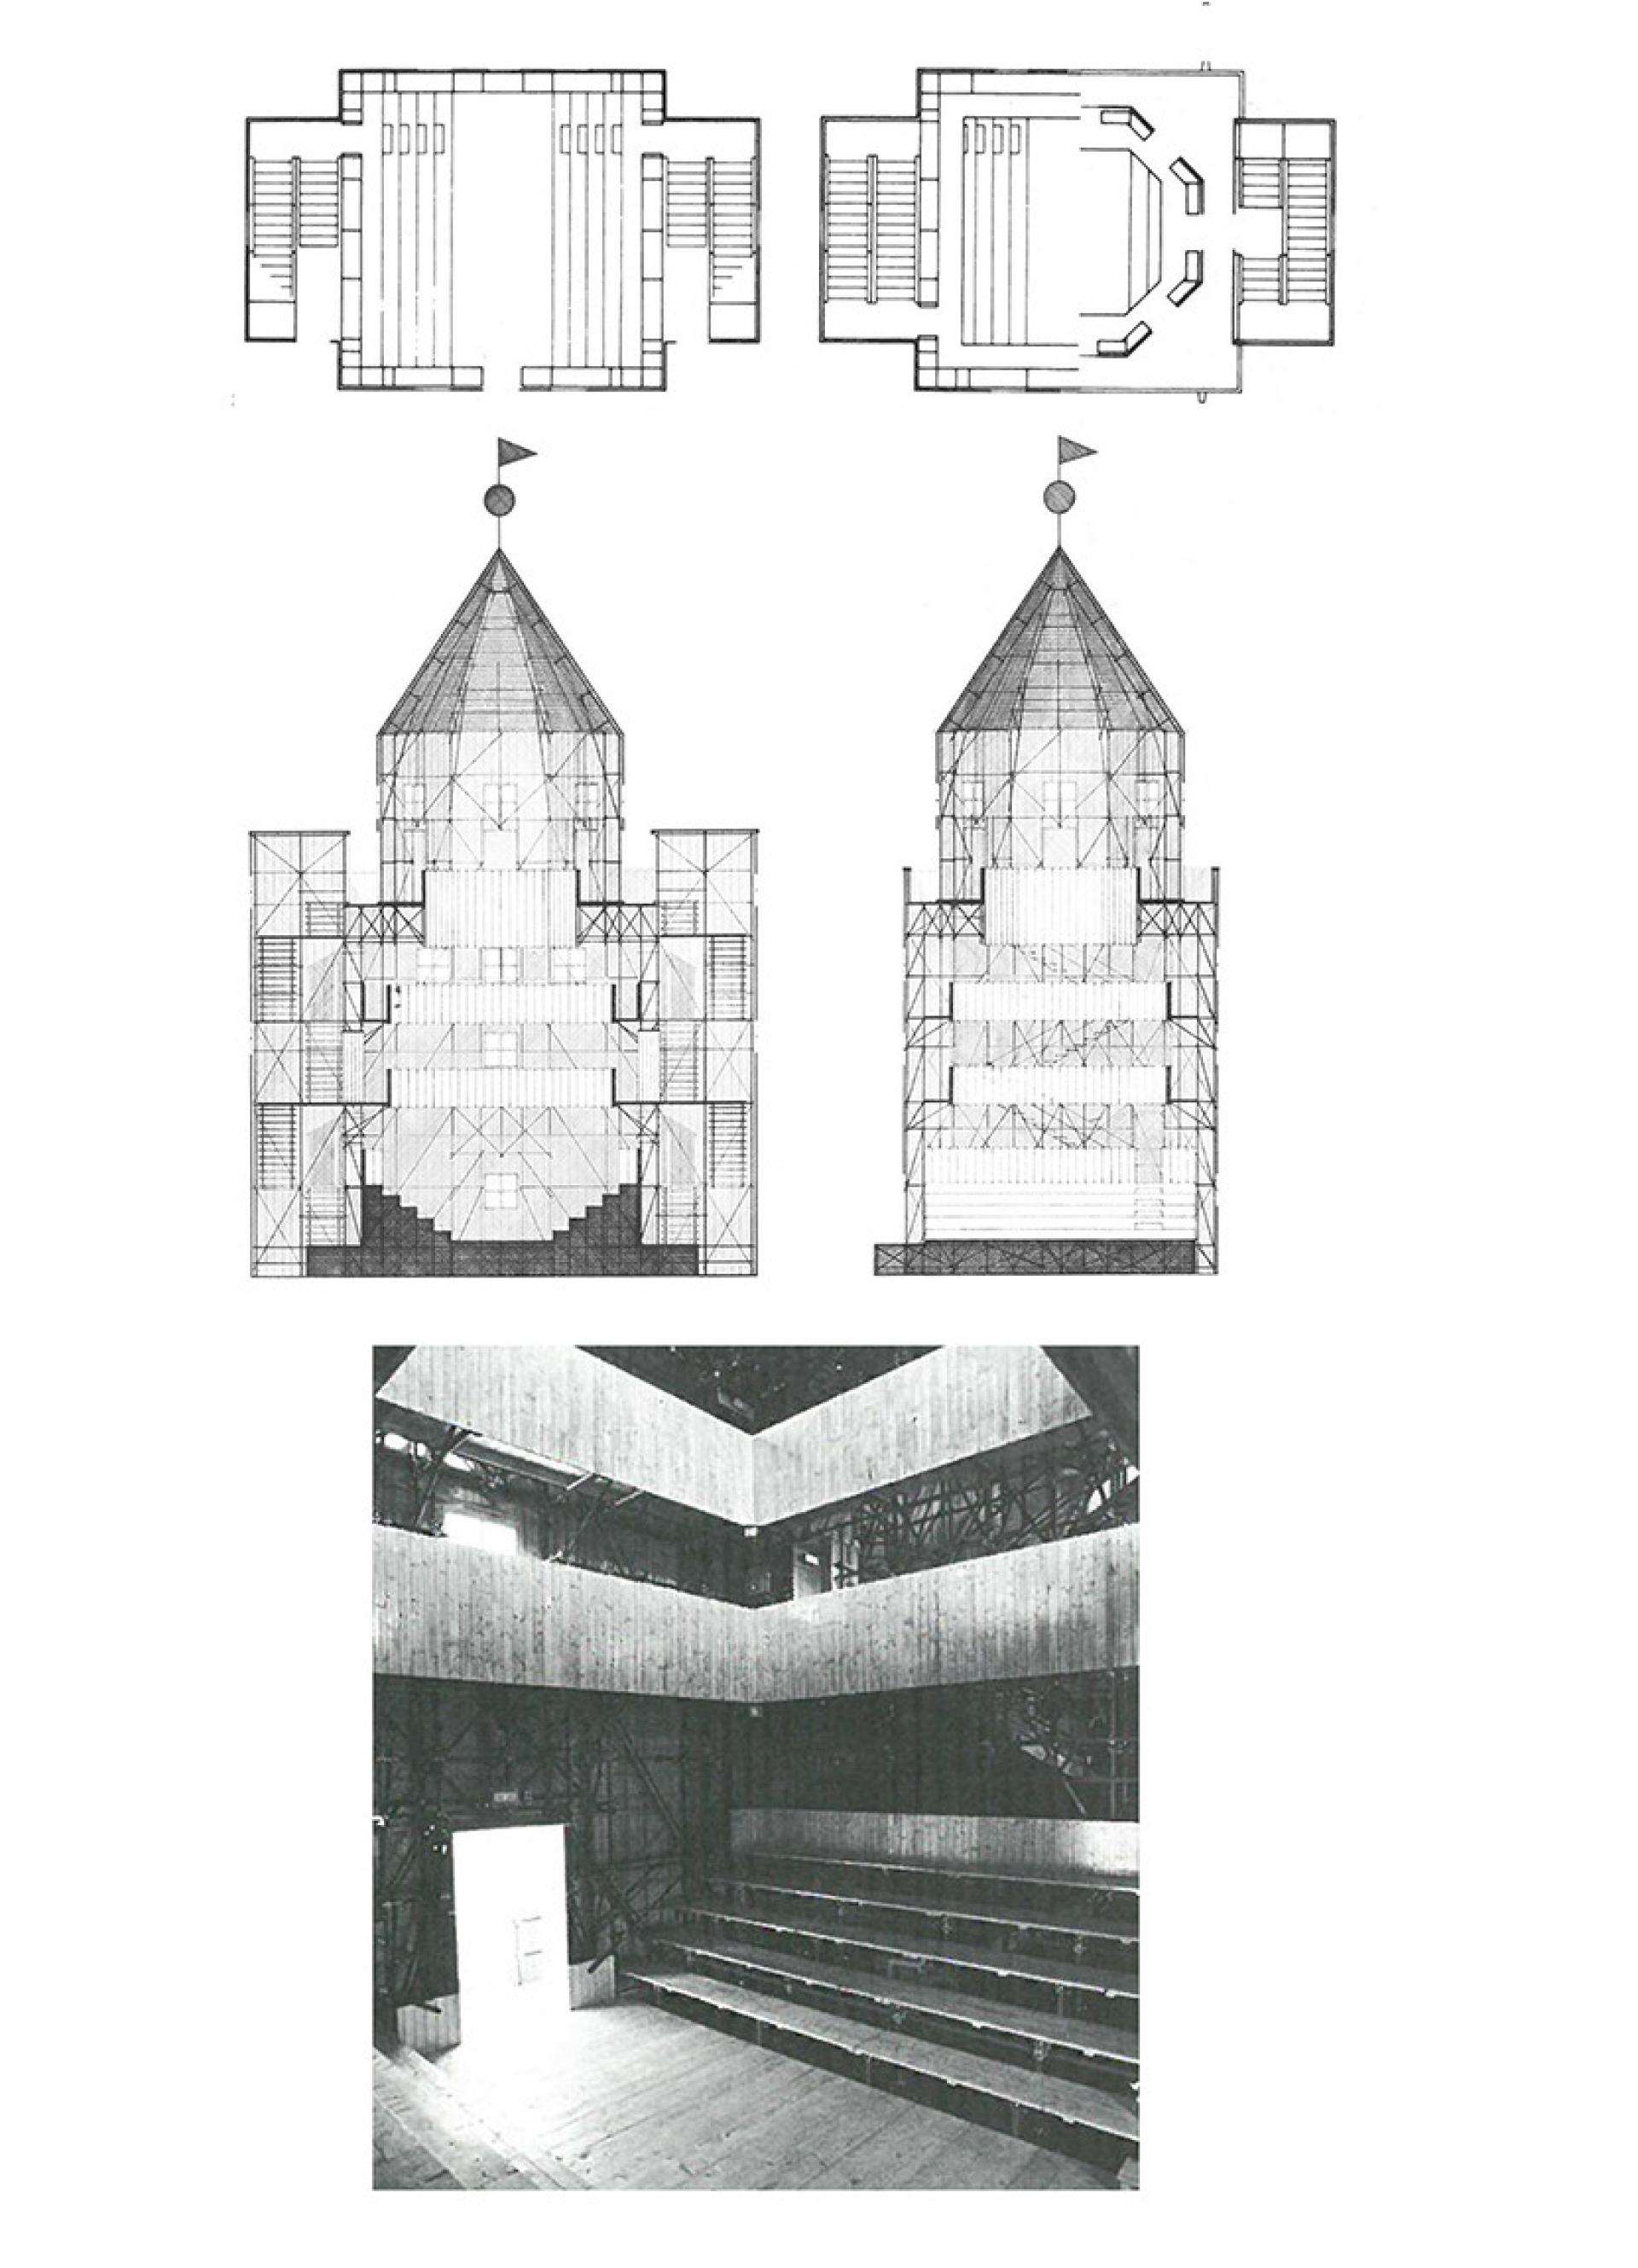 Arnell, P. and Scully, V. (1985): Aldo Rossi-Buildings and projects. Rizzoli International Publications, New York.